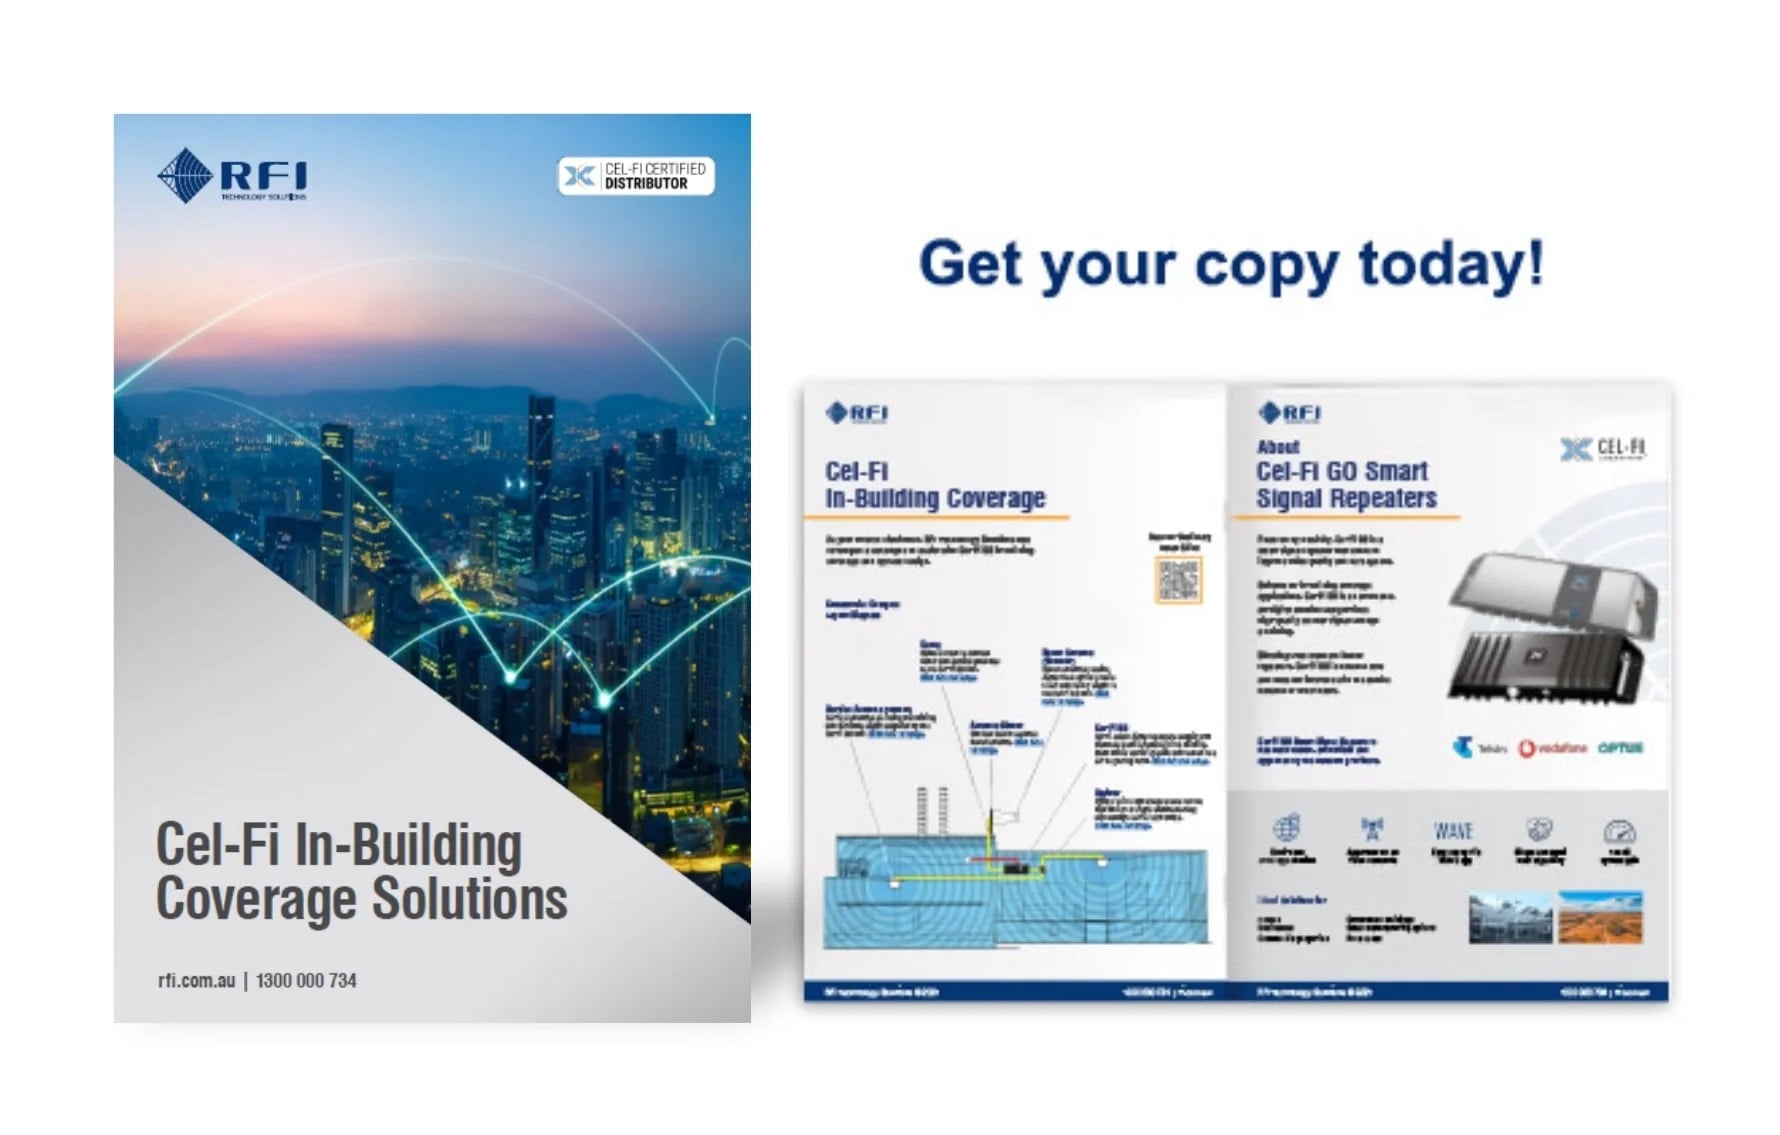 Cel-Fi In-Building Coverage Solutions Guide